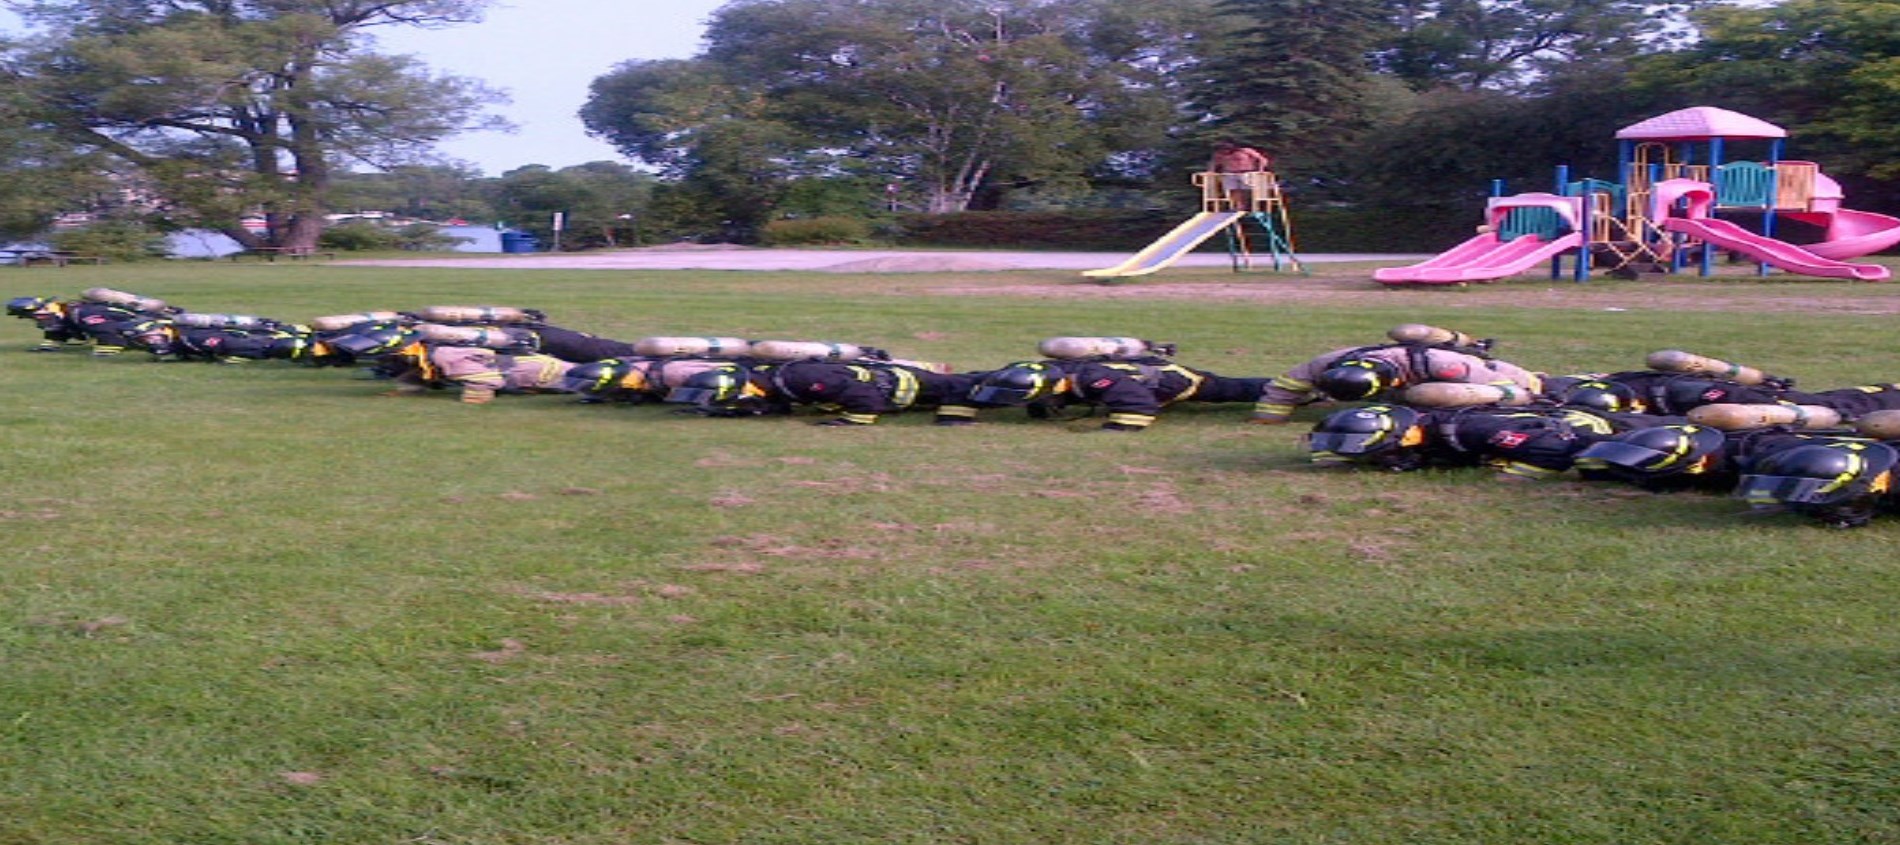 Fire fighters doing push ups in a park